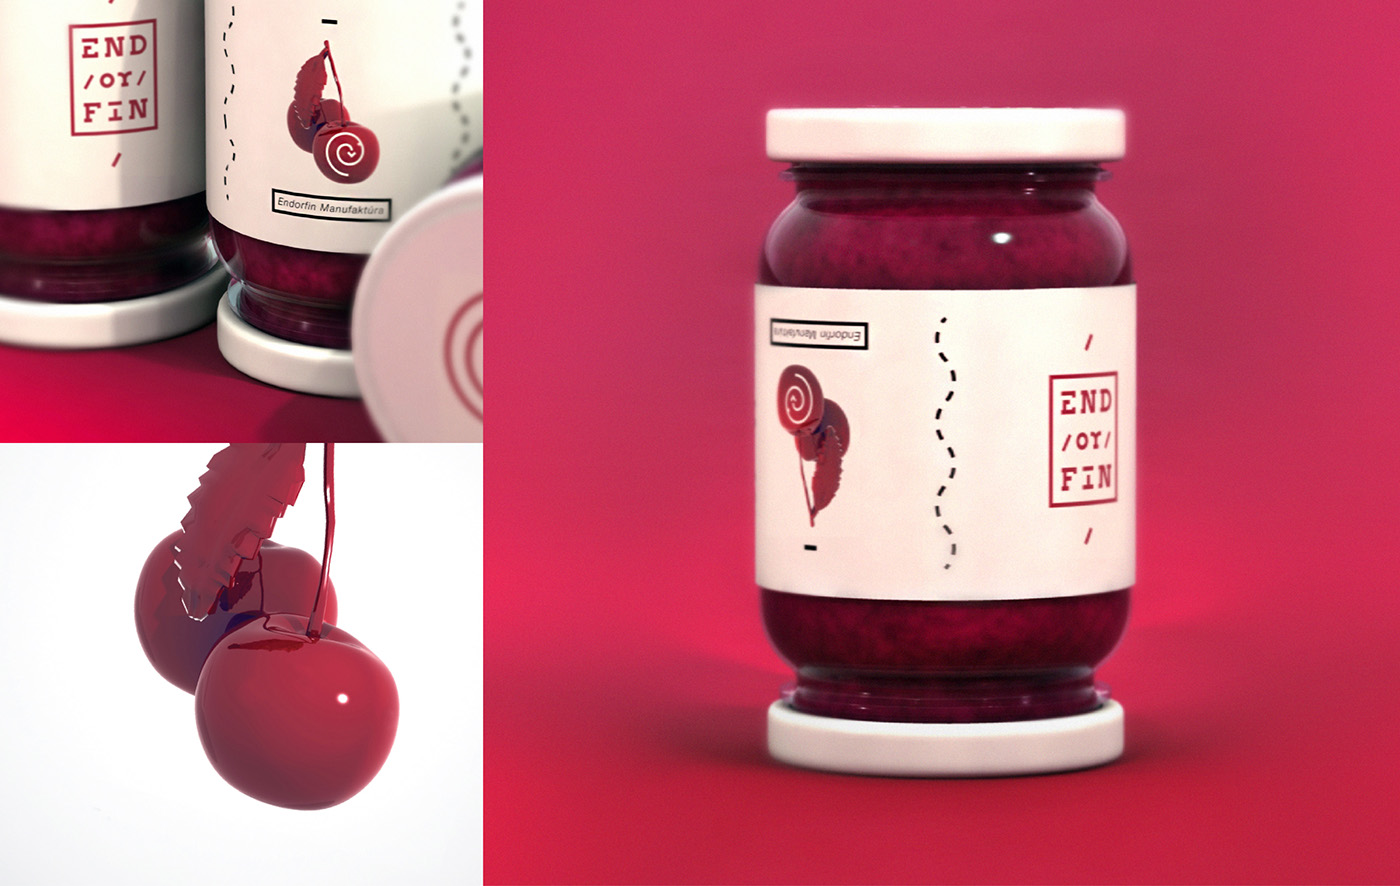 endorfin peach Plum cherry currant strawberry jam marmalade upsidedown 3D modelling manufacture end fin color